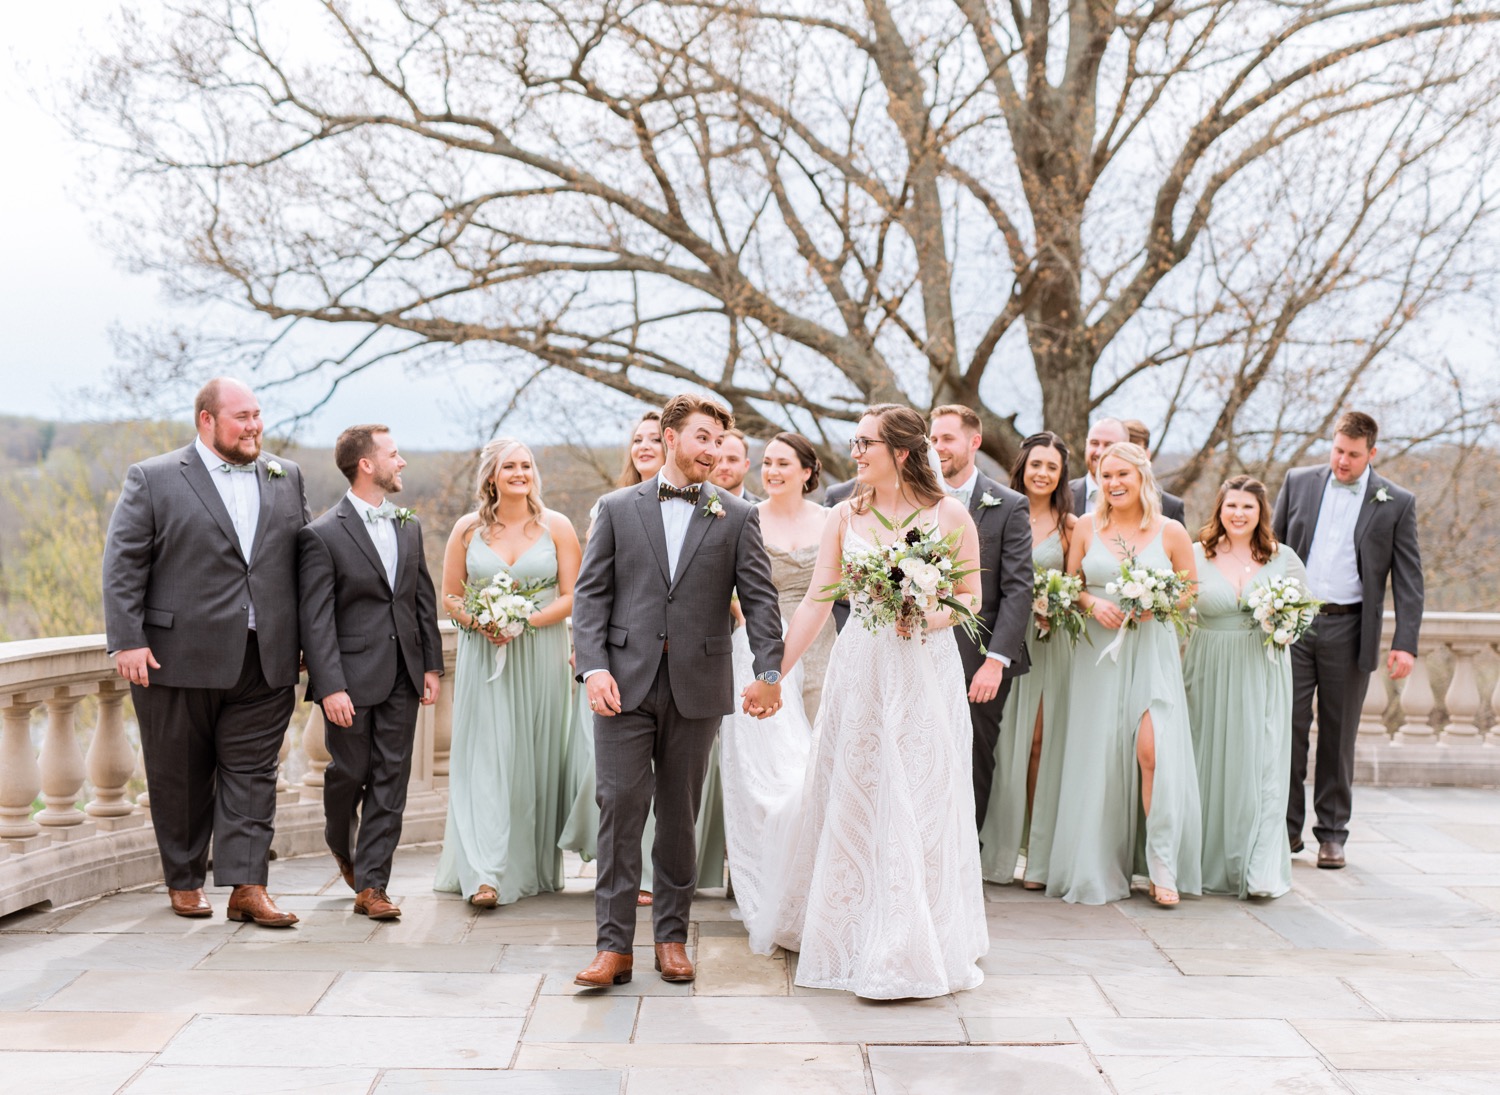 Bride and groom showcase their happiness with bridal party at wedding in Richmond Virginia